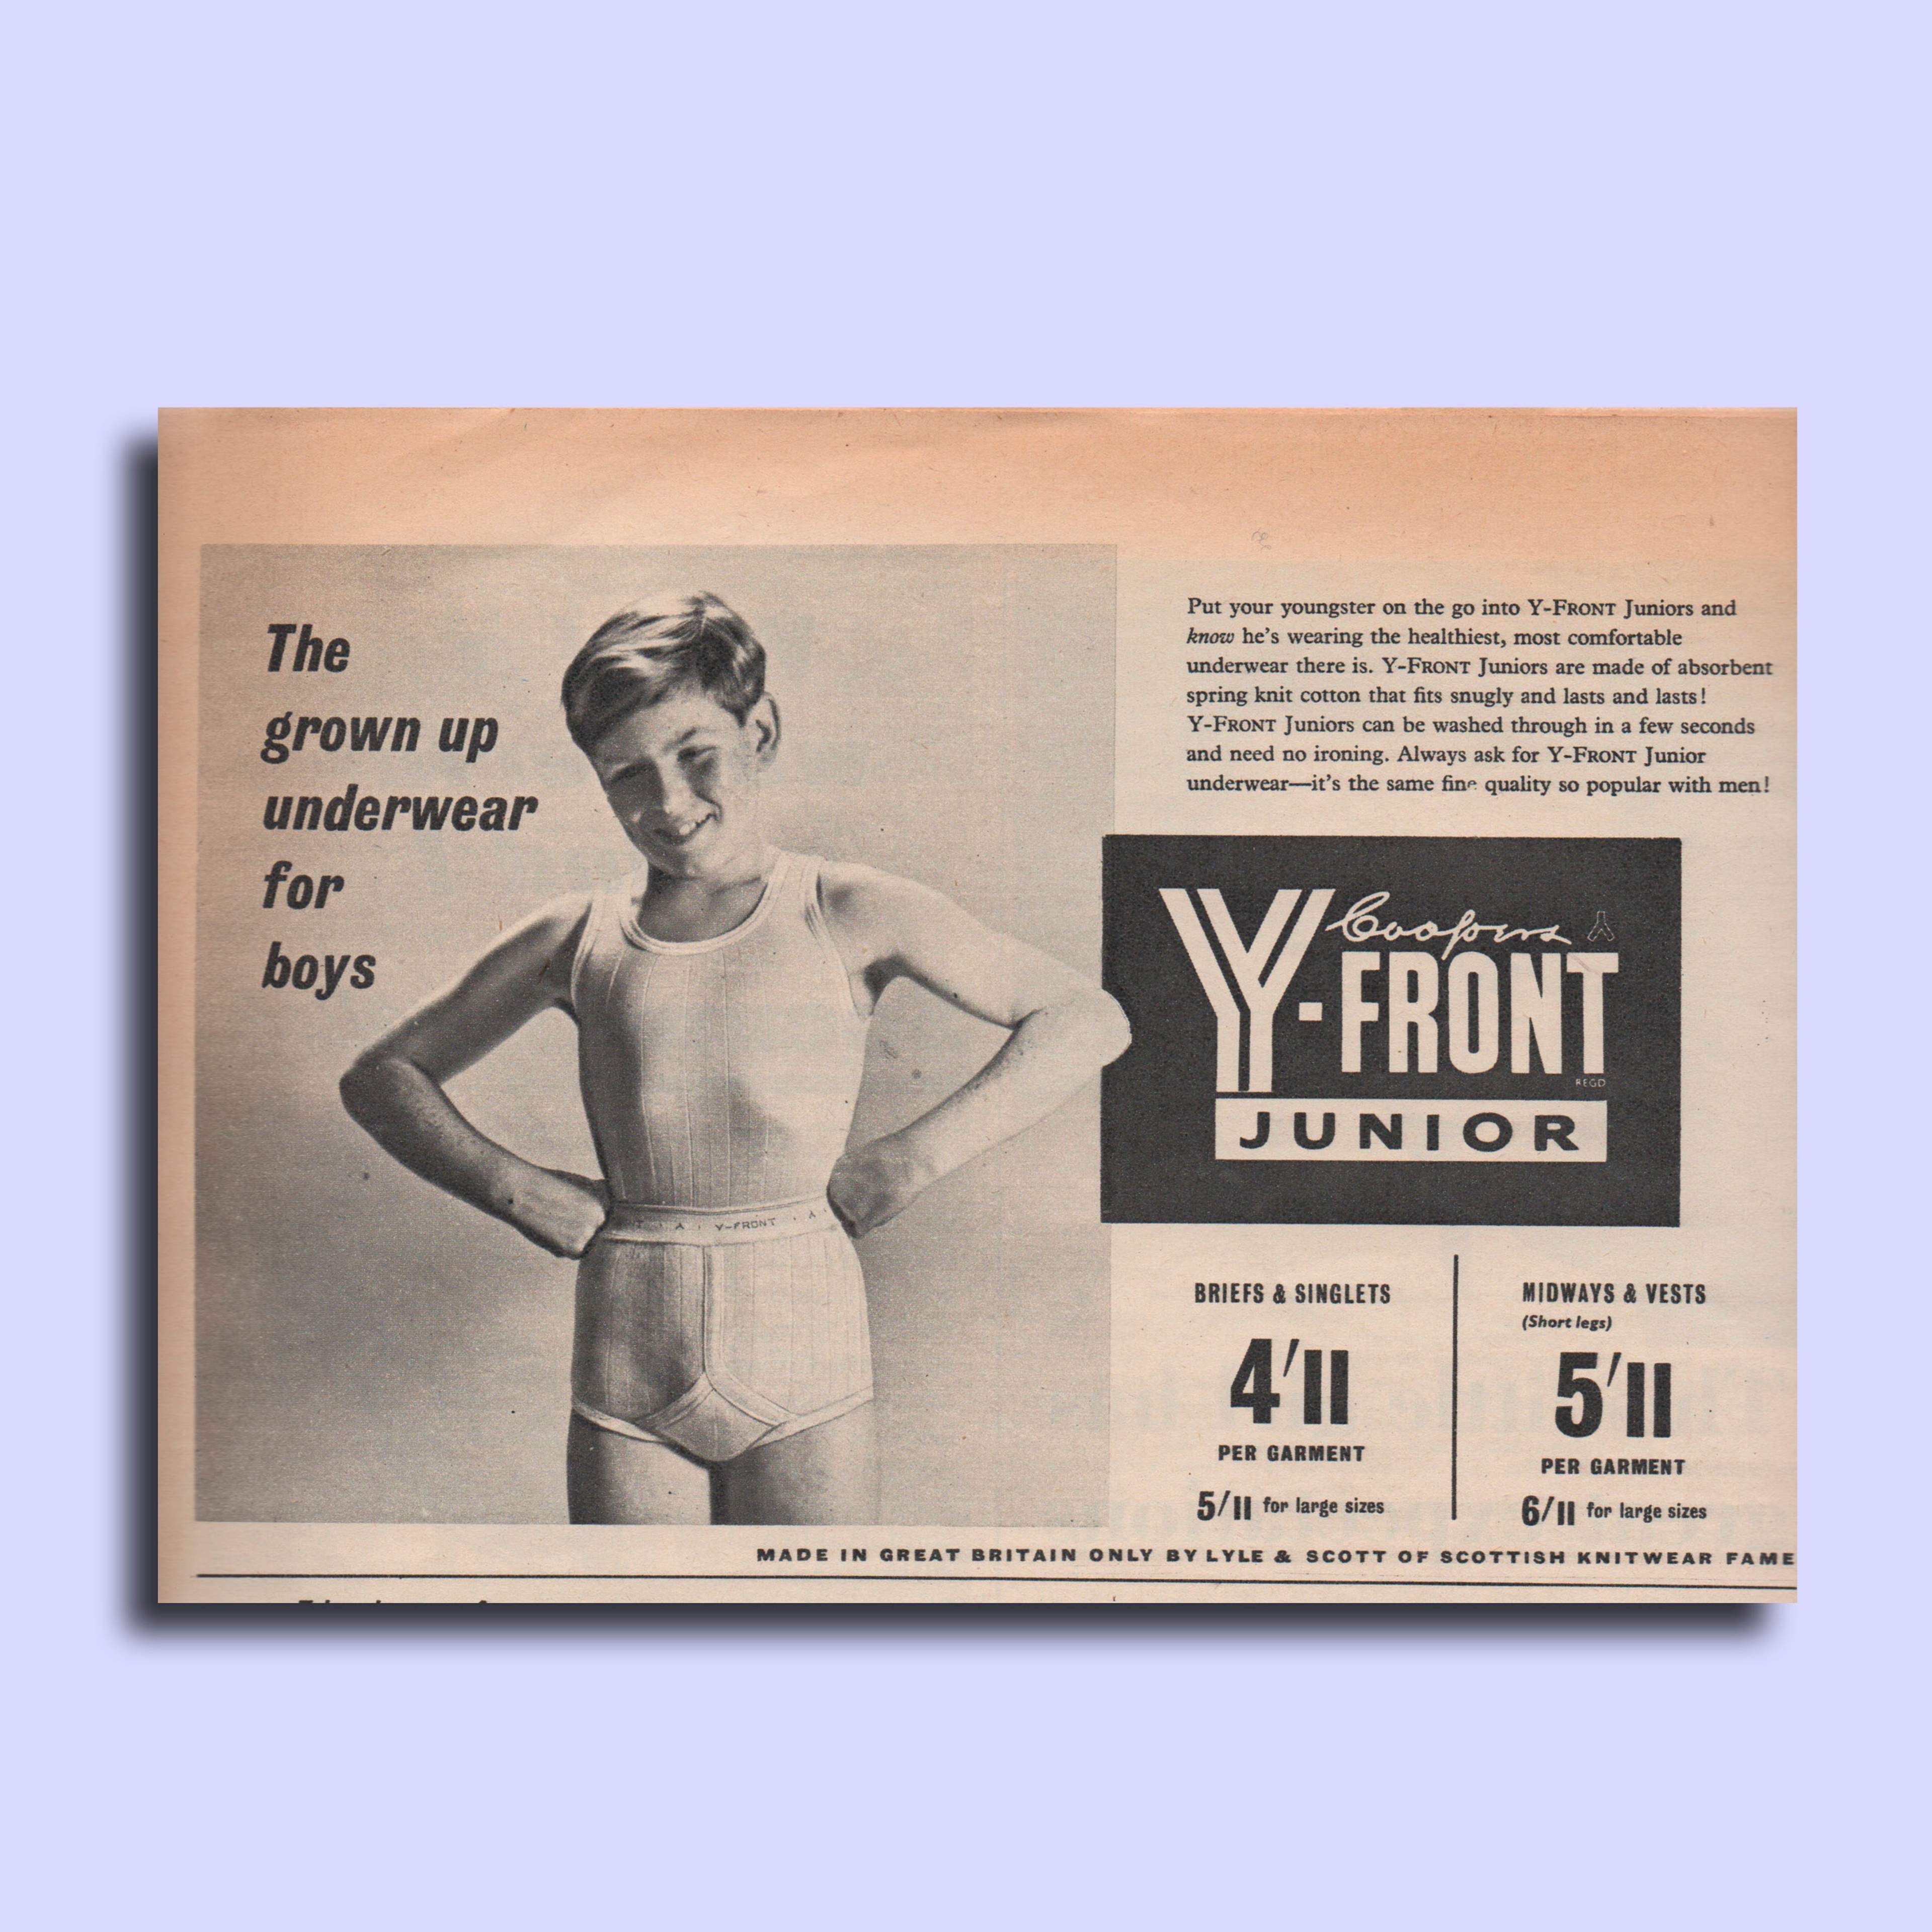 Y-front underwear 1959 advert. Black and white photograph of a young boy in Y-front underwear.